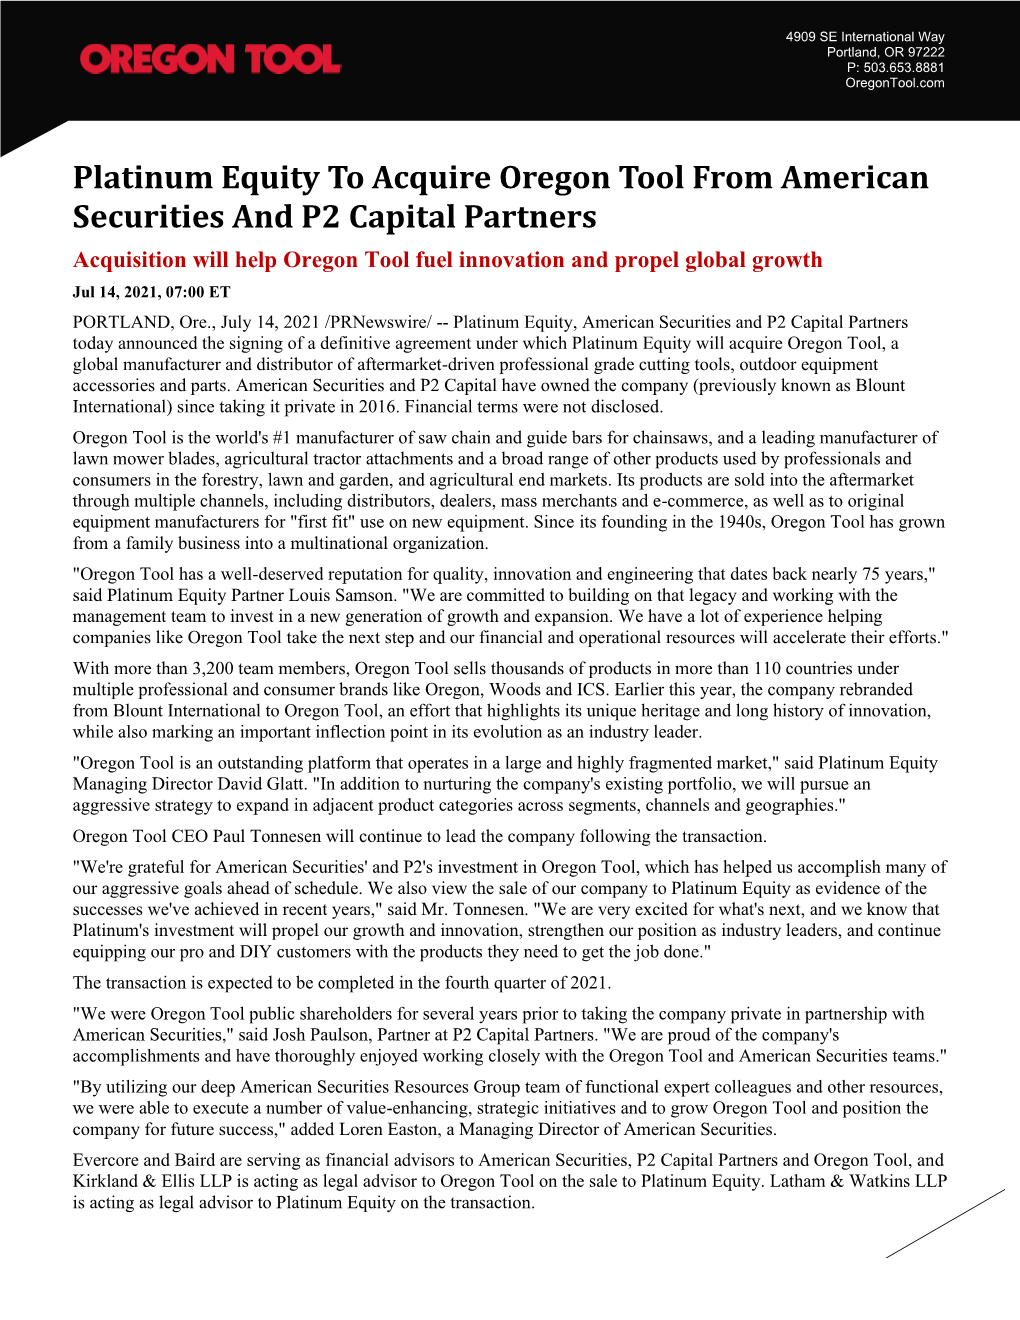 Platinum Equity to Acquire Oregon Tool from American Securities and P2 Capital Partners